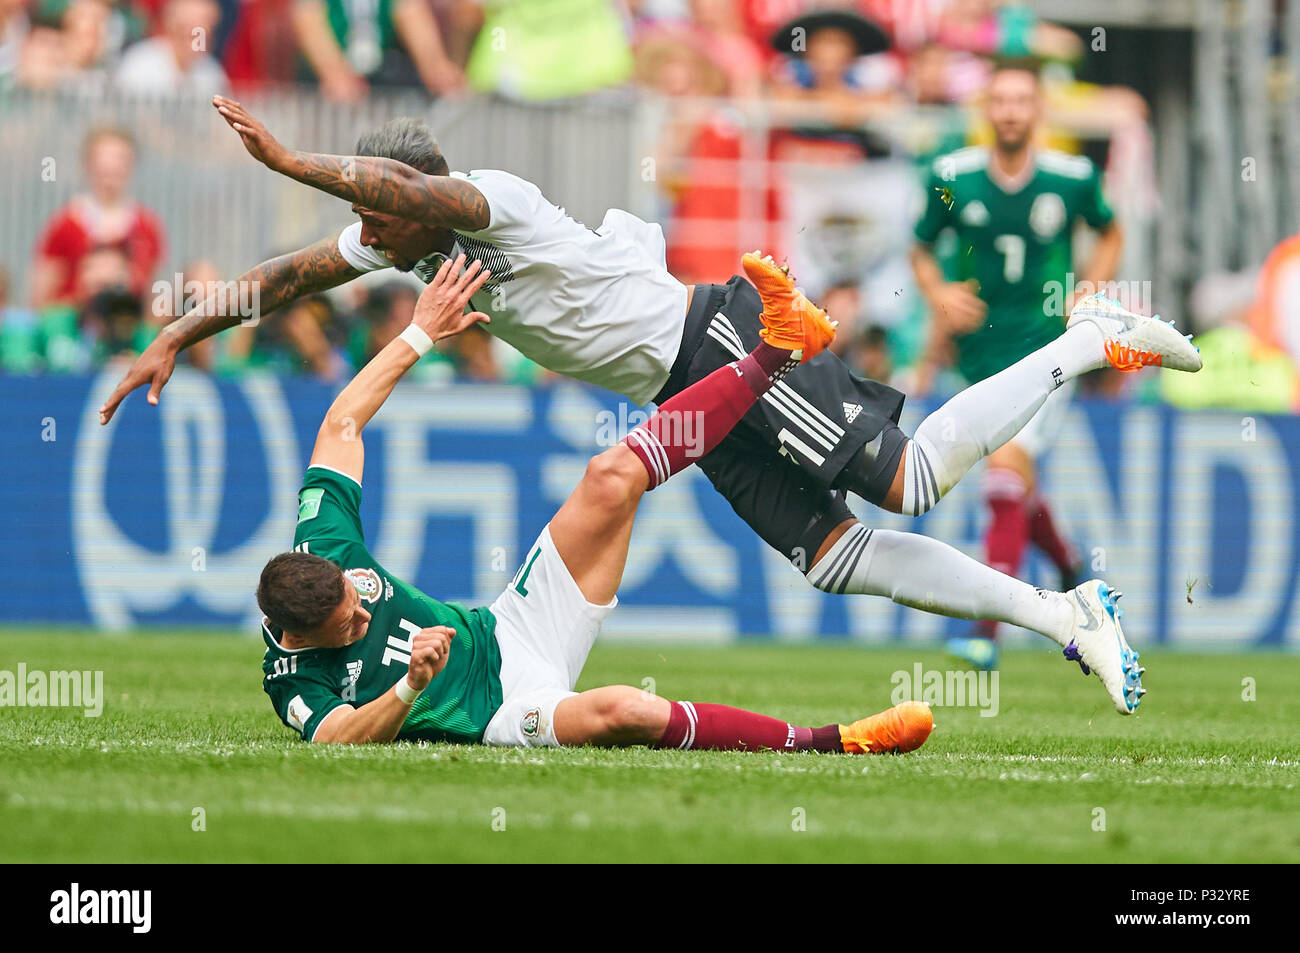 Moscow, Russia, 17 June 2018. Germany - Mexico, Soccer, Moscow, June 17, 2018 Jerome BOATENG, Nr. 17 DFB  compete for the ball, tackling, duel, header against Javier HERNANDEZ, MEX 14  GERMANY - MEXICO FIFA WORLD CUP 2018 RUSSIA, Group F, Season 2018/2019,  June 17, 2018 L u z h n i k i Stadium in Moscow, Russia.  © Peter Schatz / Alamy Live News Stock Photo